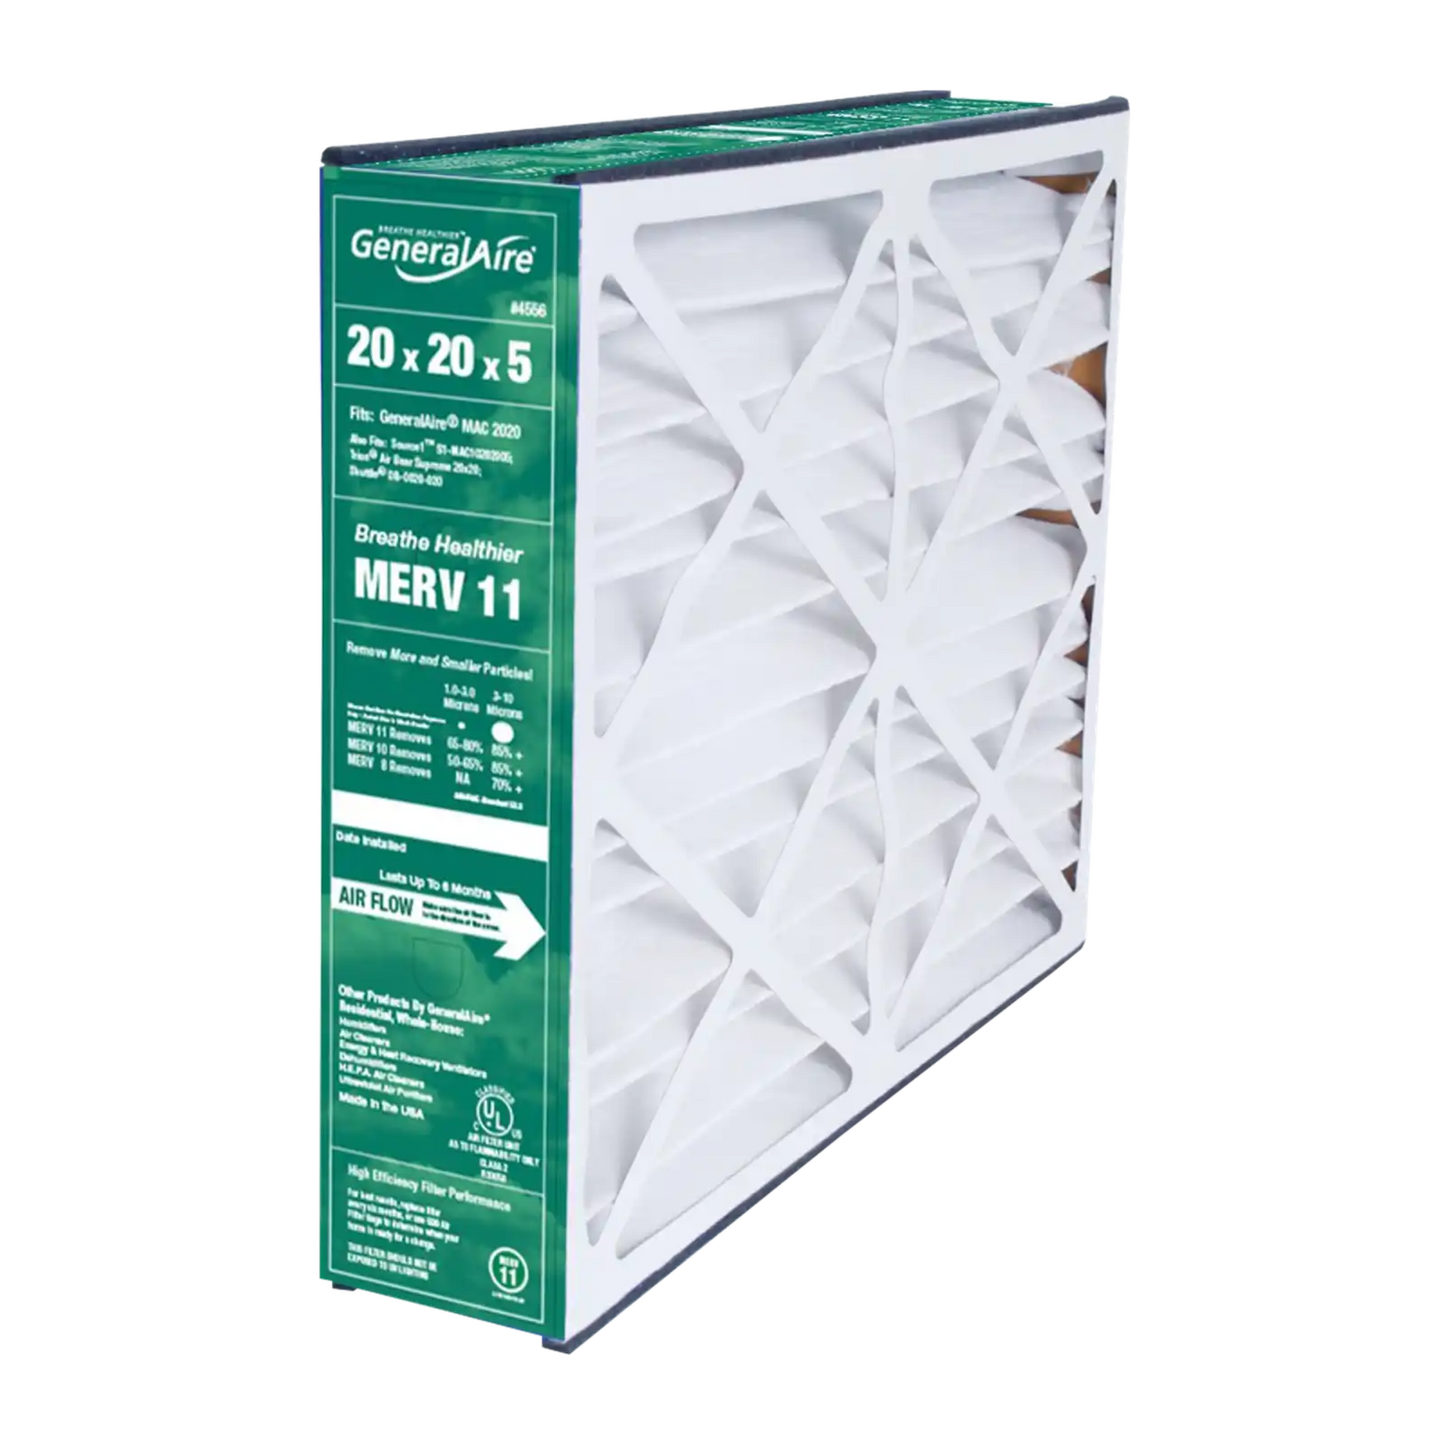 GeneralAire ReservePro 4556 20x20x5 Furnace Filter